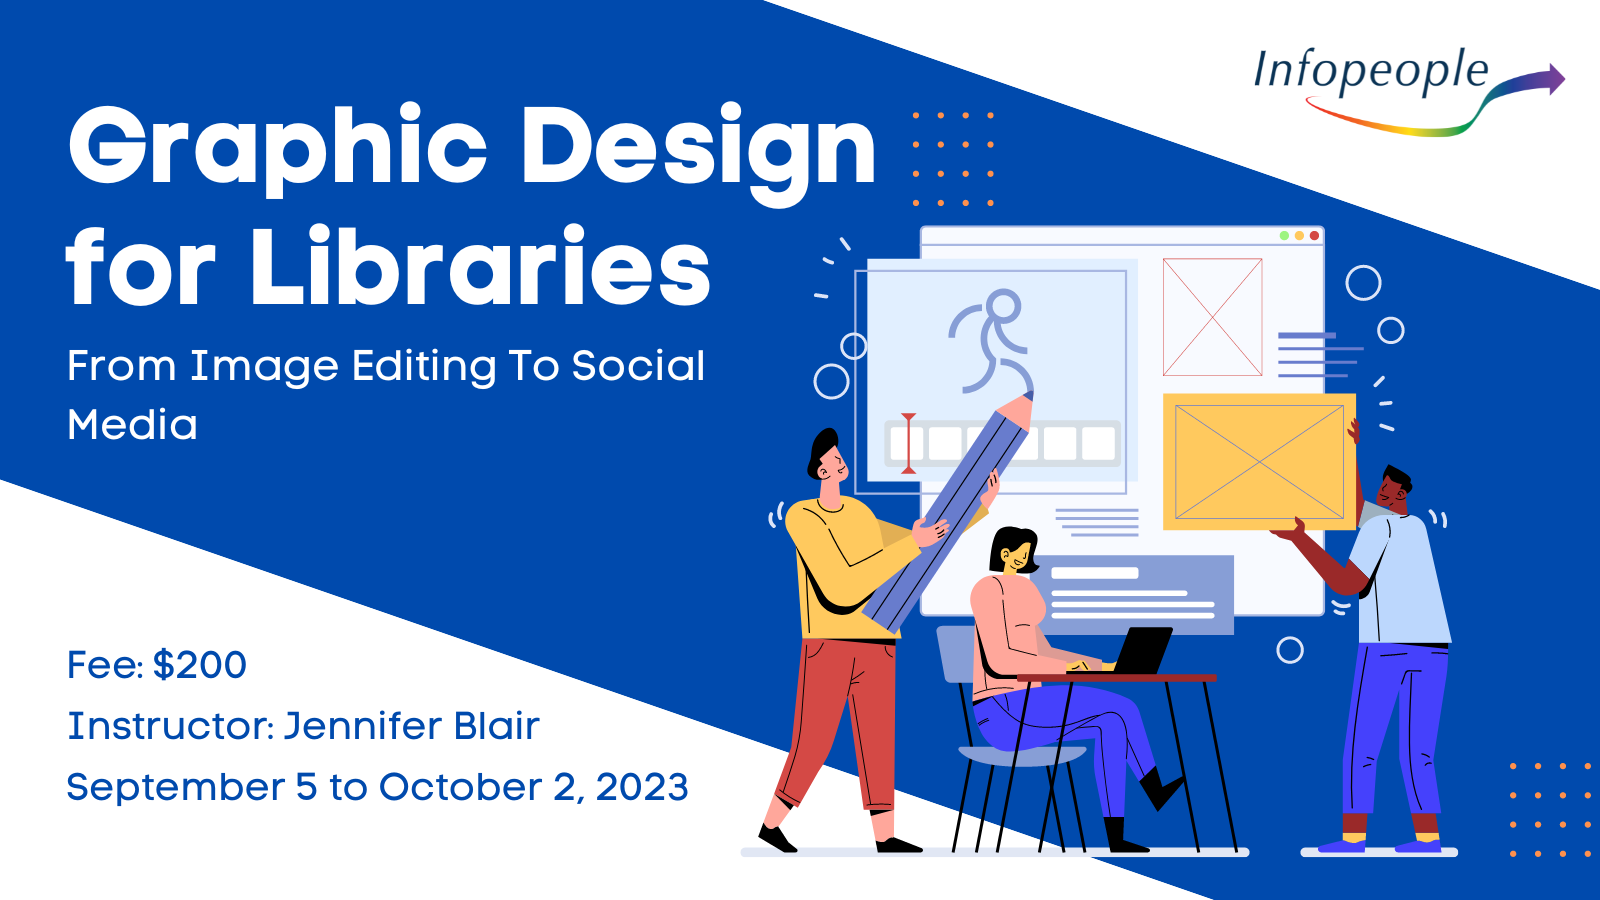 Graphic Design for Libraries: From Image Editing to Social Media - an Infopeople course. Instructor: Jennifer Blair. Fee: $200; September 5 to October 2, 2023. Artwork of people editing a layout.